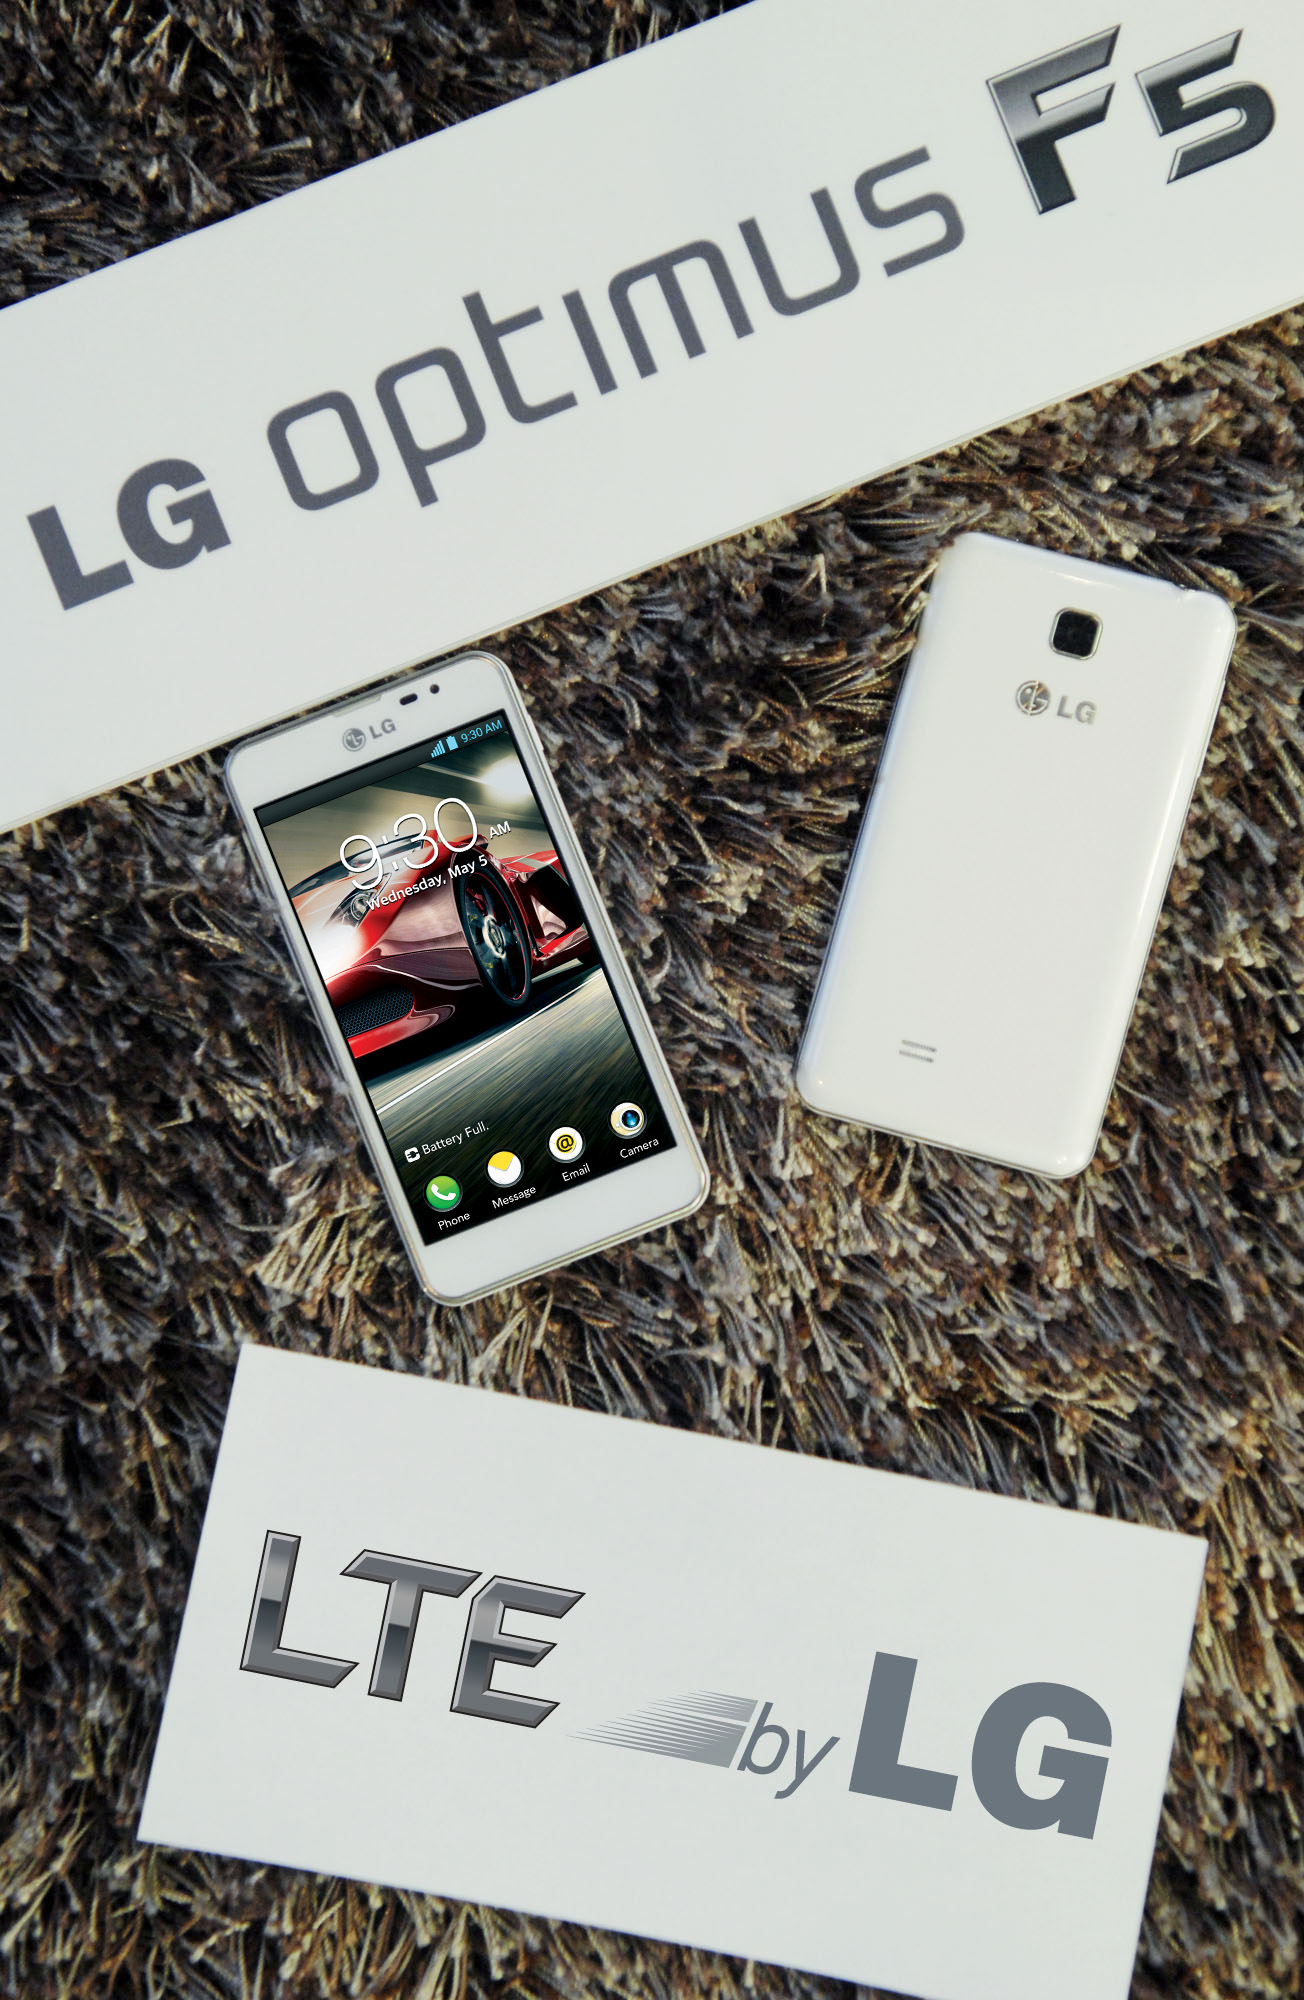 Two LG Optimus F5s on a carpet with panels saying ‘LG Optimus F5’ and ‘LTE by LG’ – one showing its front and the other one showing its back.